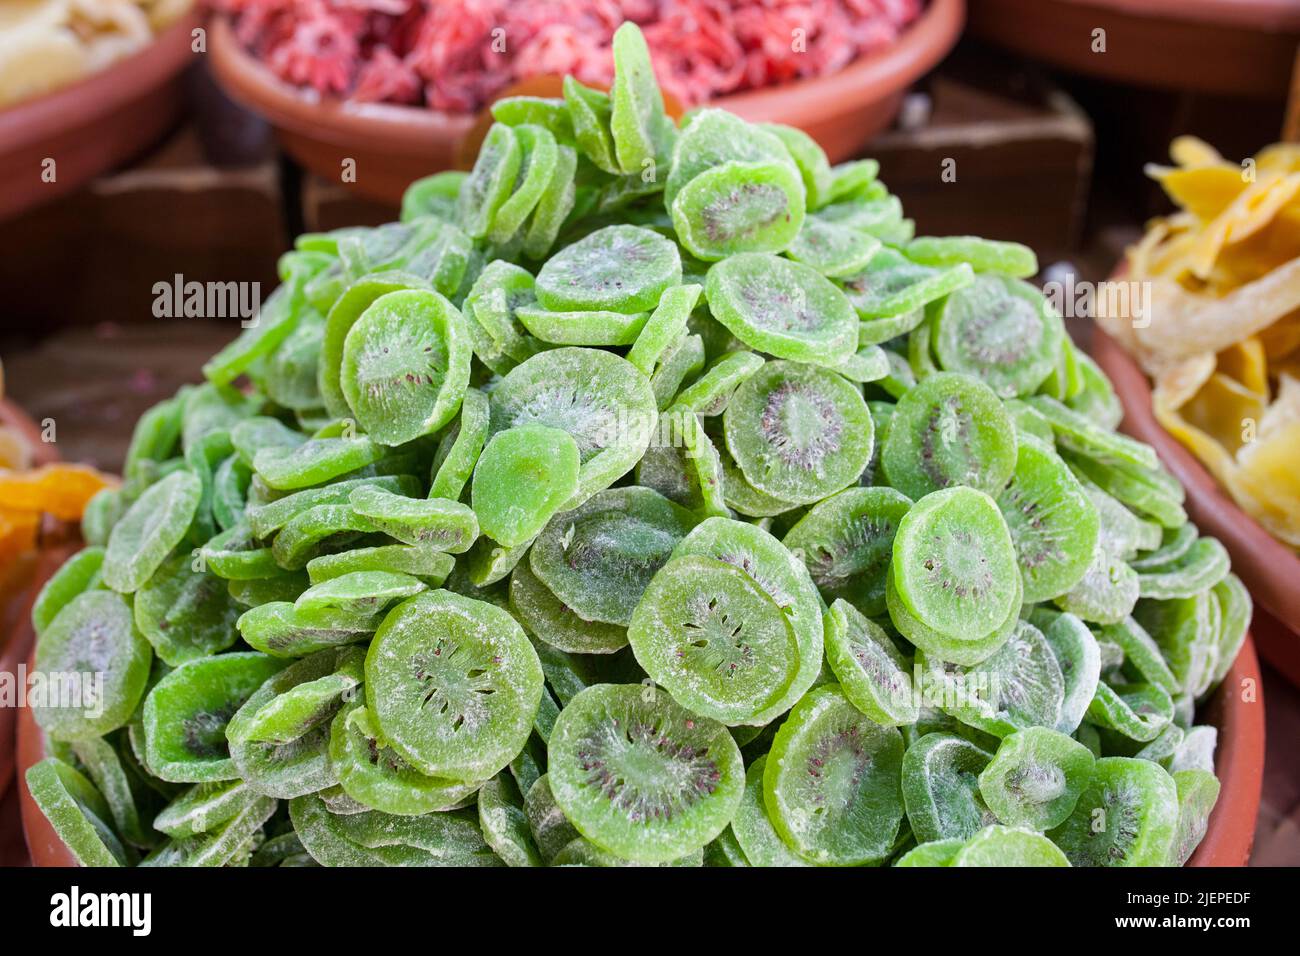 Bowl with dried kiwifruit. Slices displayed at street market stall Stock Photo